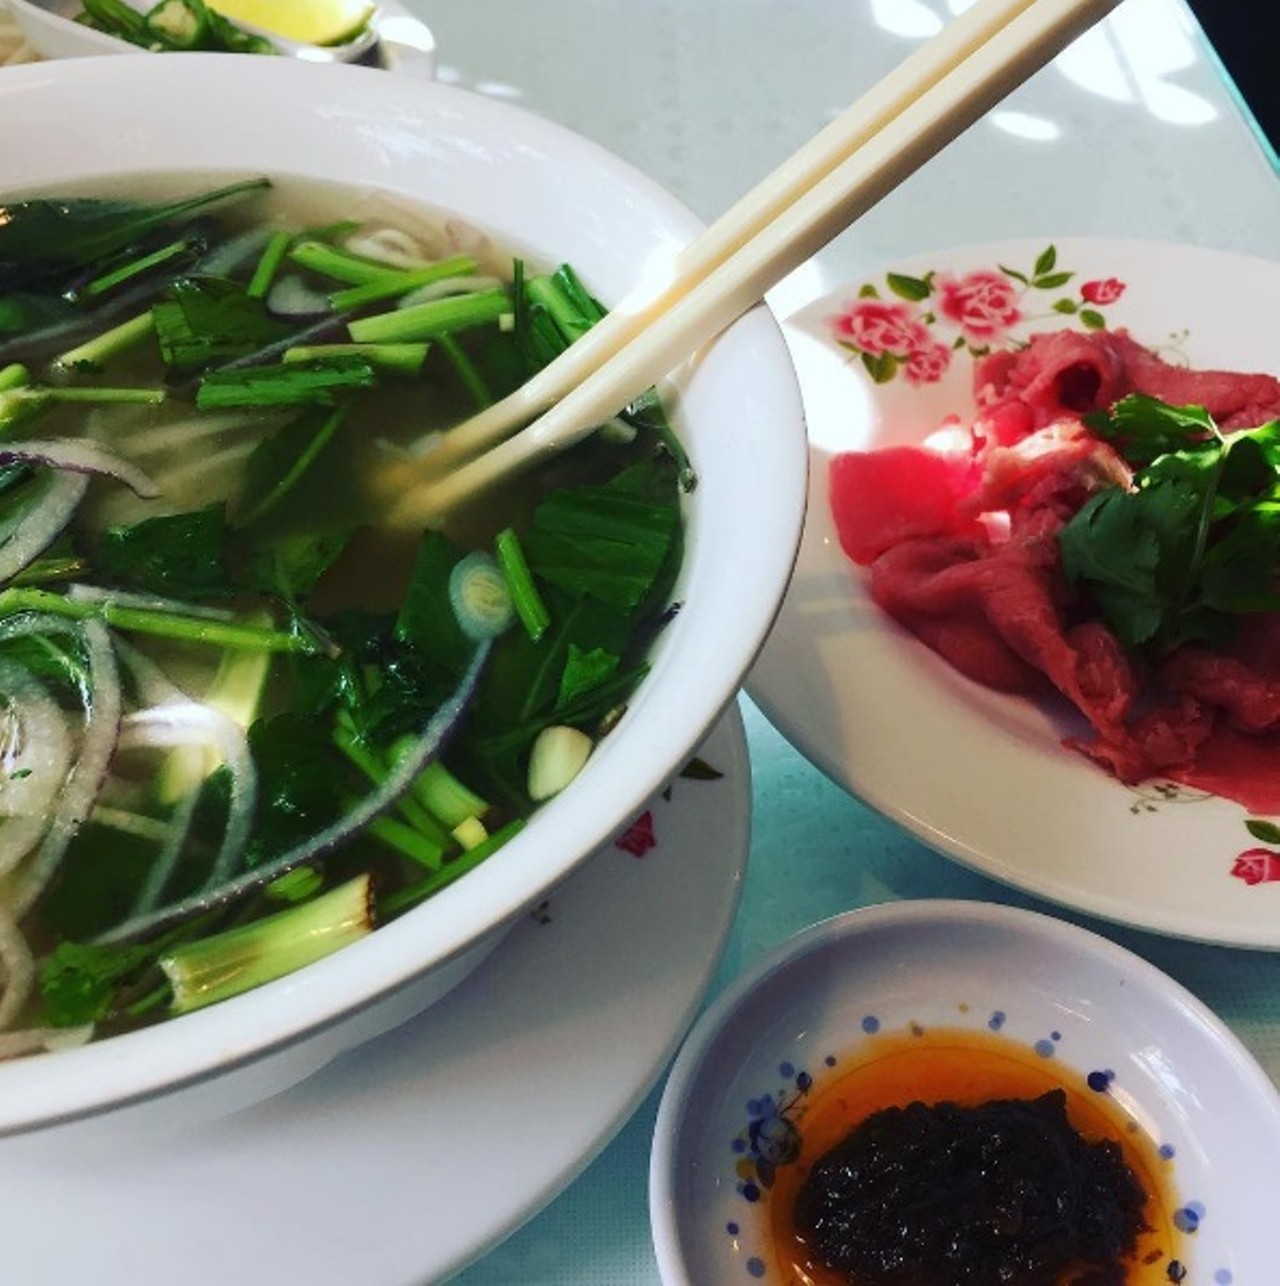  Minh Anh
5428 Detroit Ave., (216) 961-9671
Small, casual and friendly, this family-owned Vietnamese restaurant serves cinnamon-scented pho, colossal cr&ecirc;pes and an assortment of tasty noodle bowls, along with plenty of vegetarian options.
Photo via thedyingbirds/Instagram